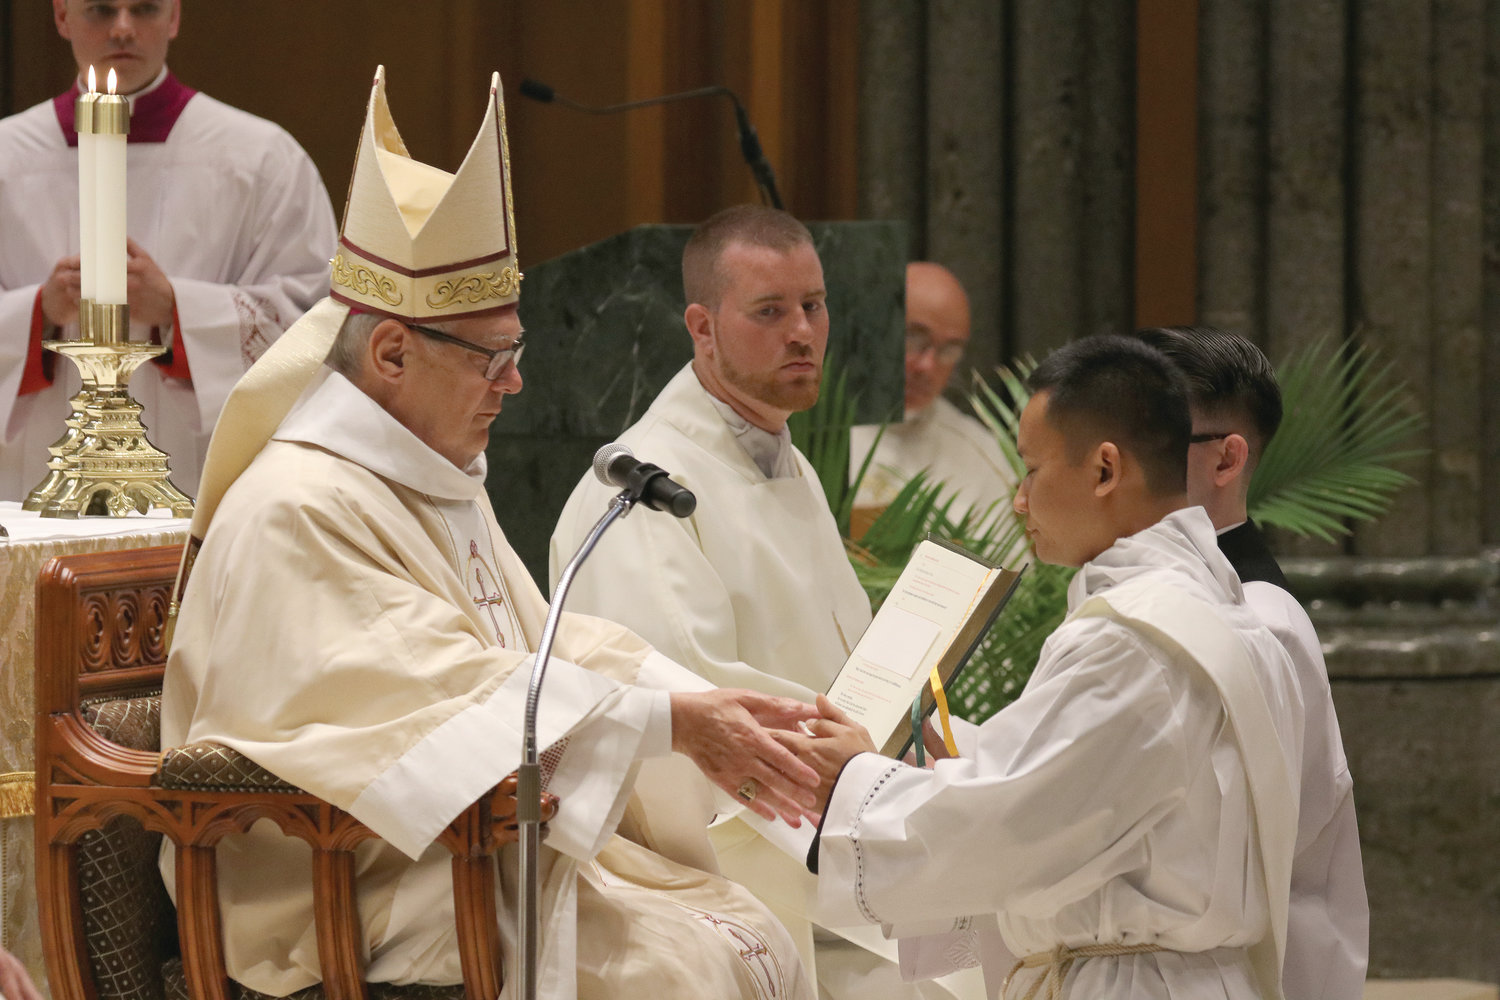 Father Nguyen humbly step forth to offer the Promise of the Elect.